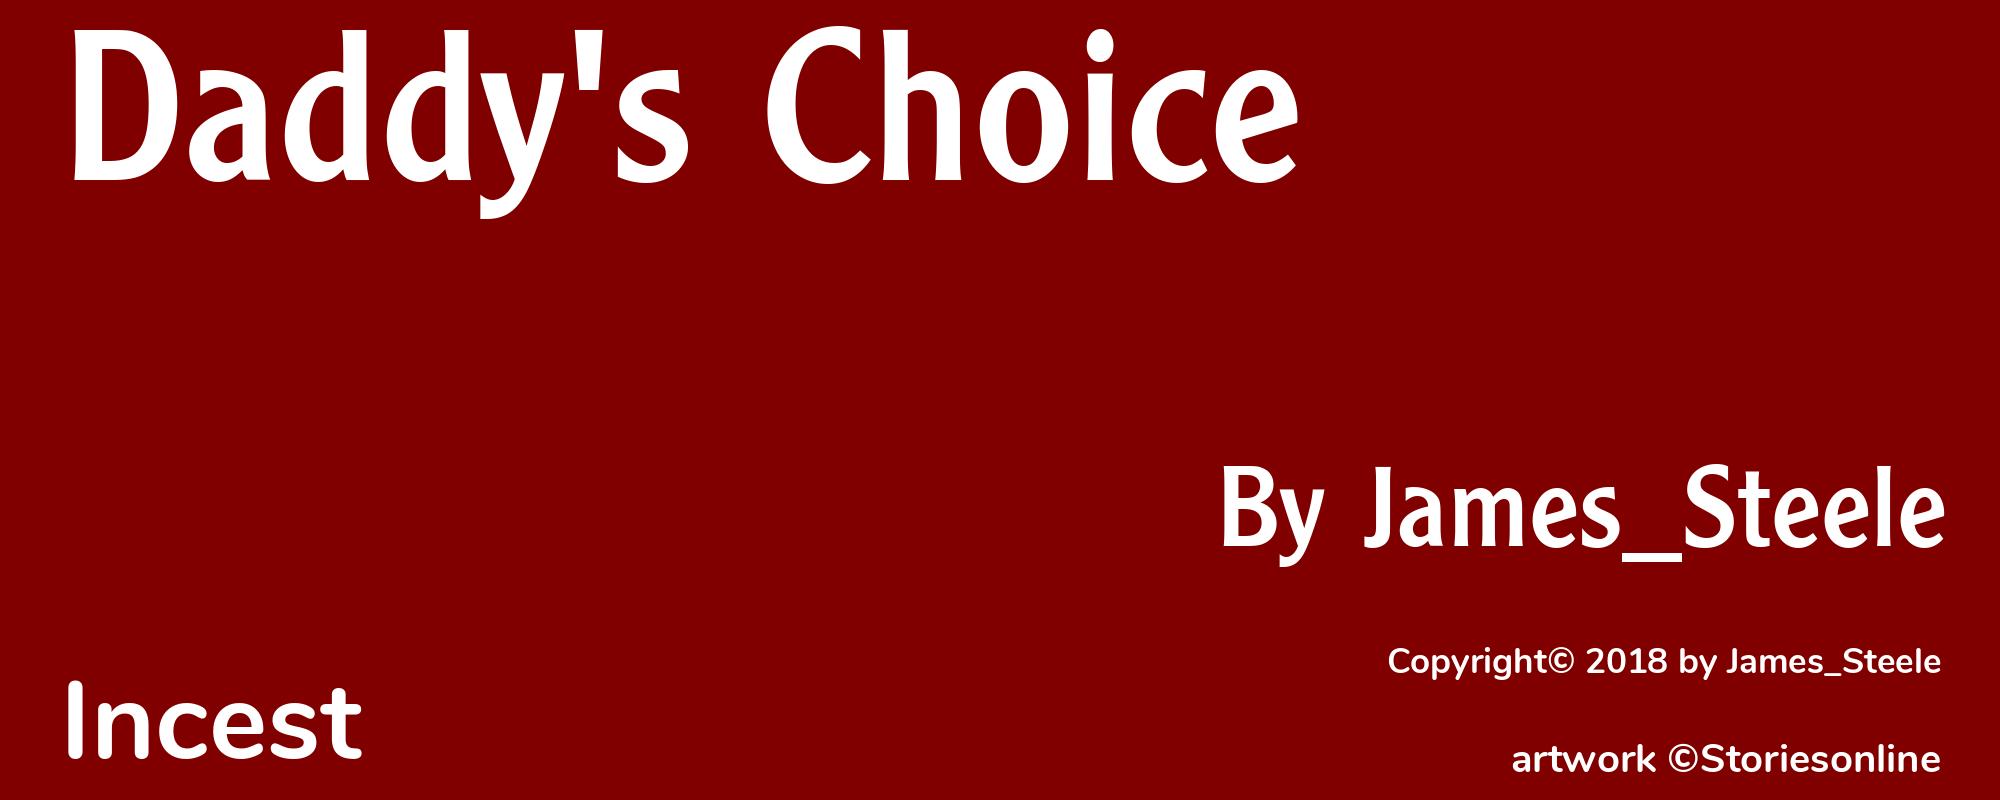 Daddy's Choice - Cover